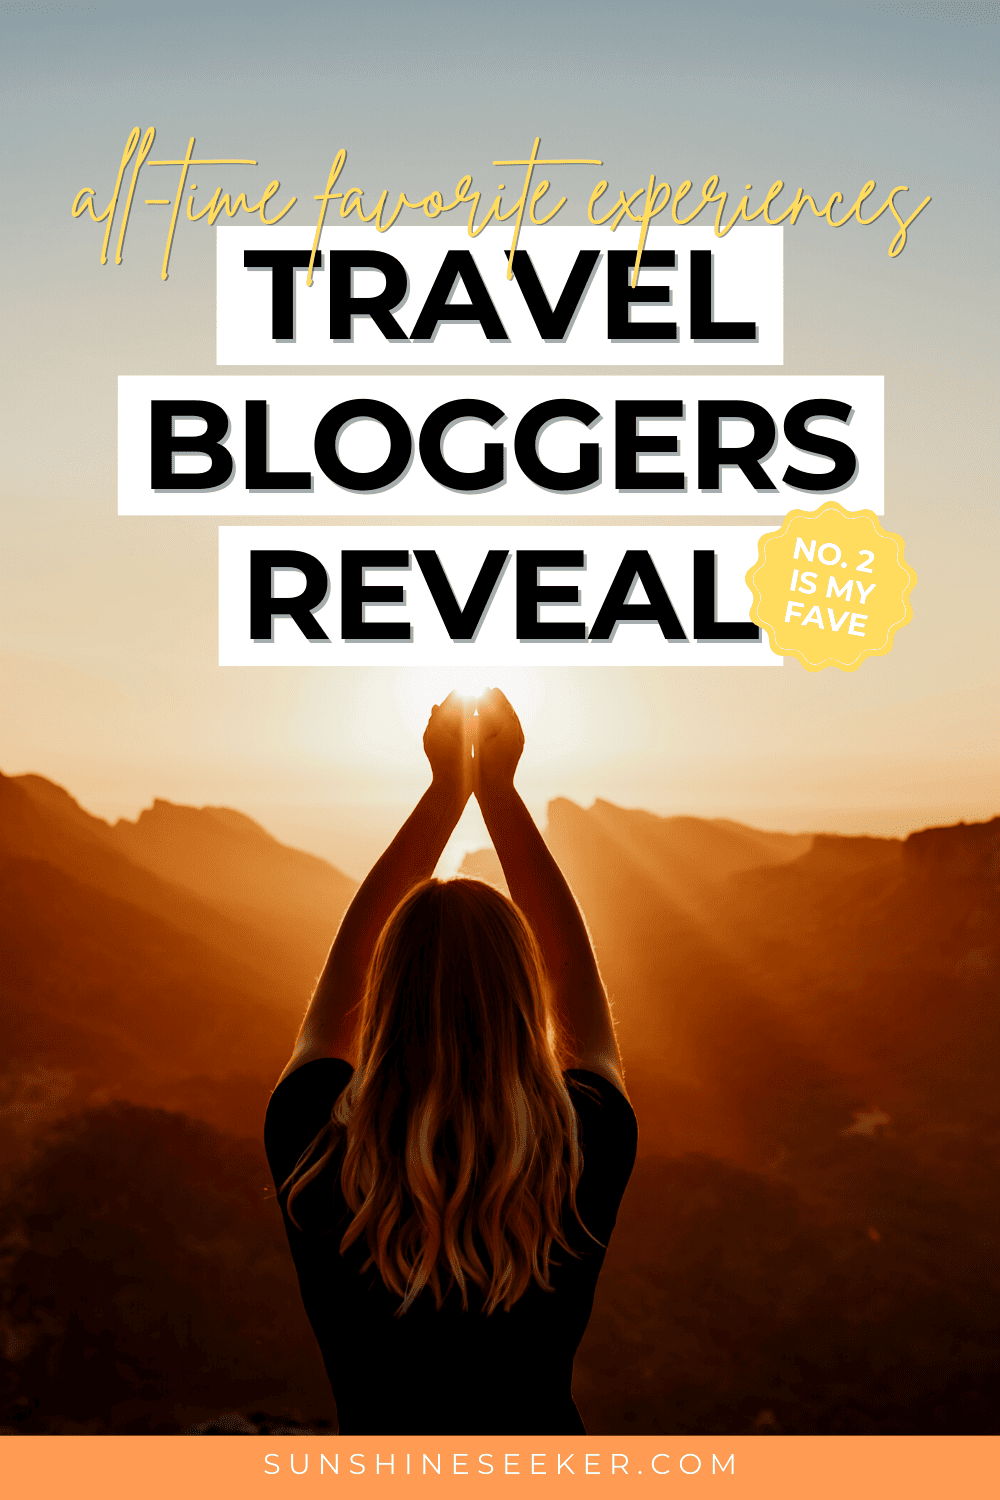 Female travel bloggers reveal their all time favorite travel experiences. Looking for unforgettable experiences for your bucket list? From kayaking in Nunavut and swimming in the wadis of Oman to healing at a spiritual retreat in Ubud, you don't want to miss these!